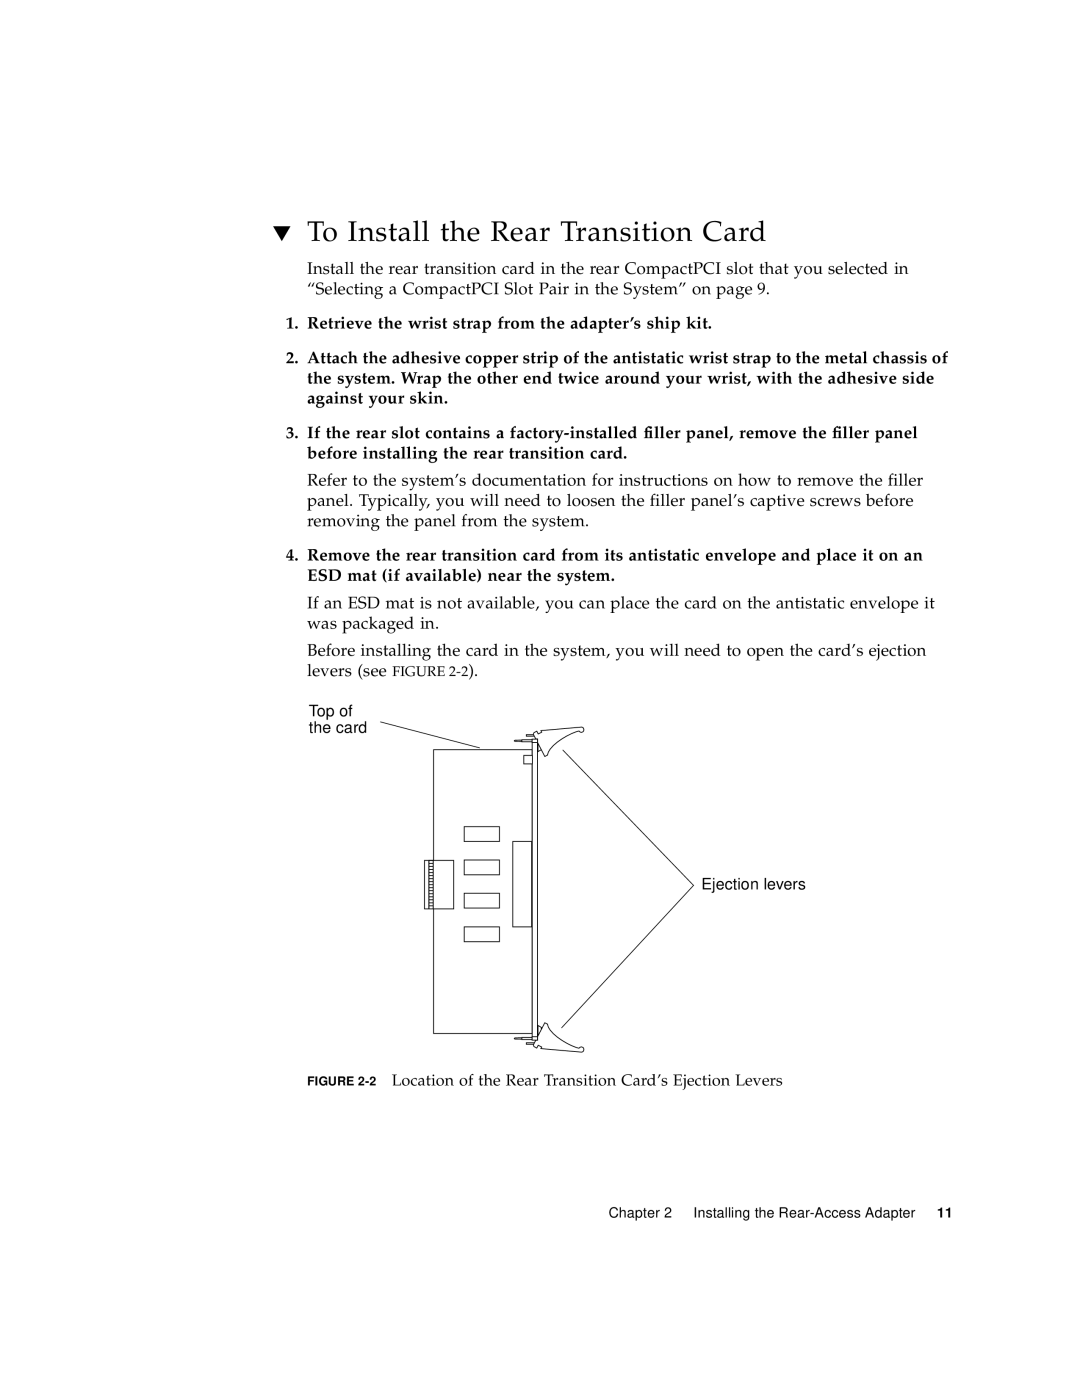 Sun Microsystems 6U manual To Install the Rear Transition Card 